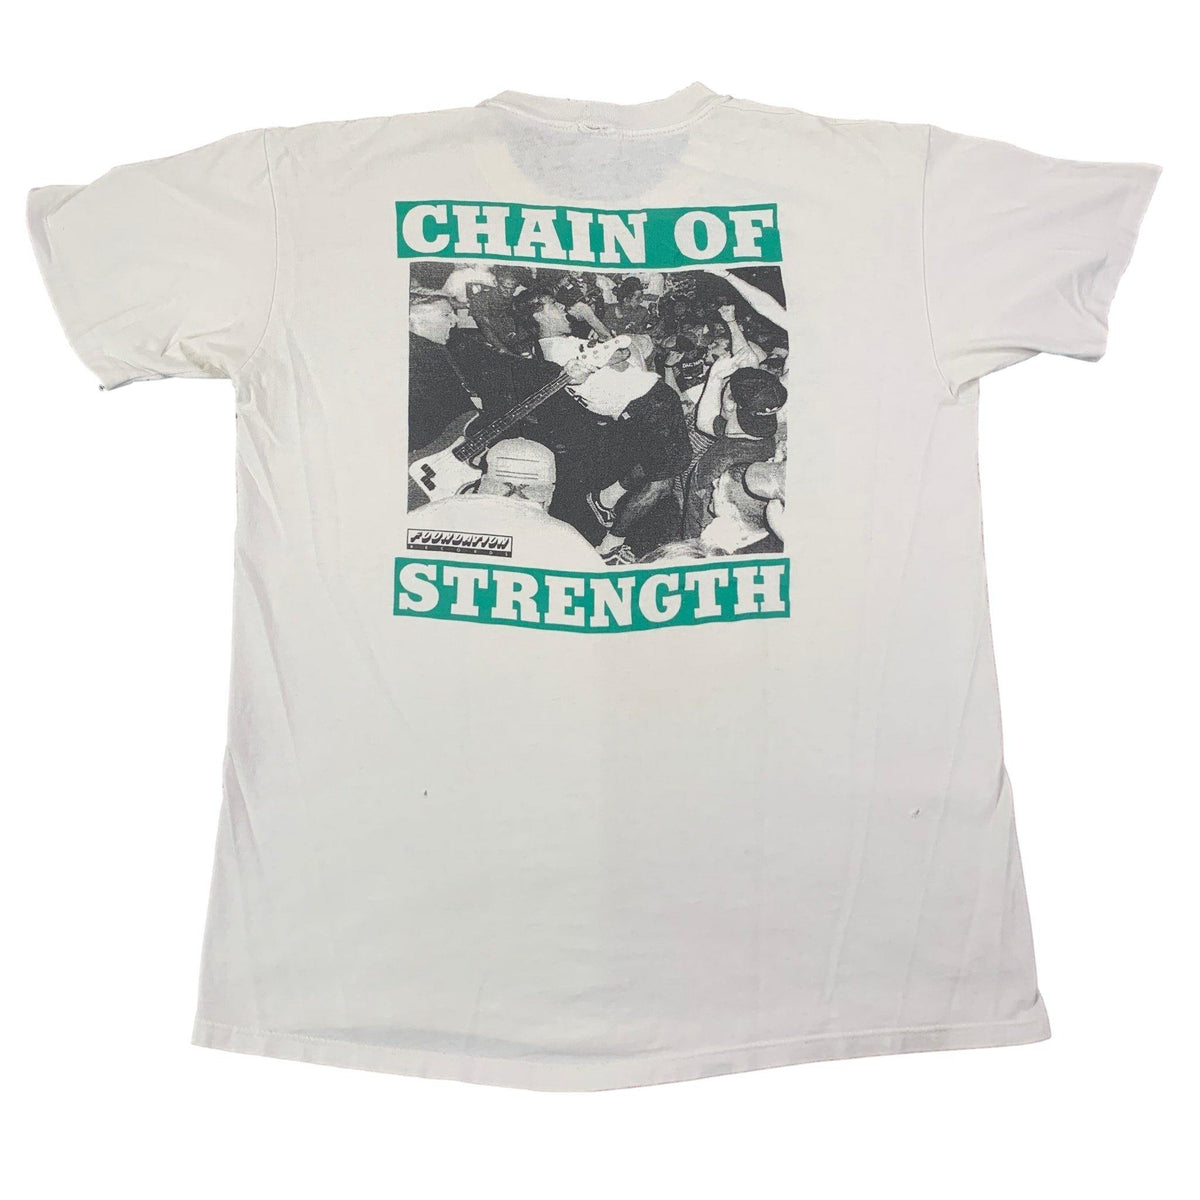 Vintage Chain Of Strength &quot;What Holds Us Apart&quot; T-Shirt - jointcustodydc